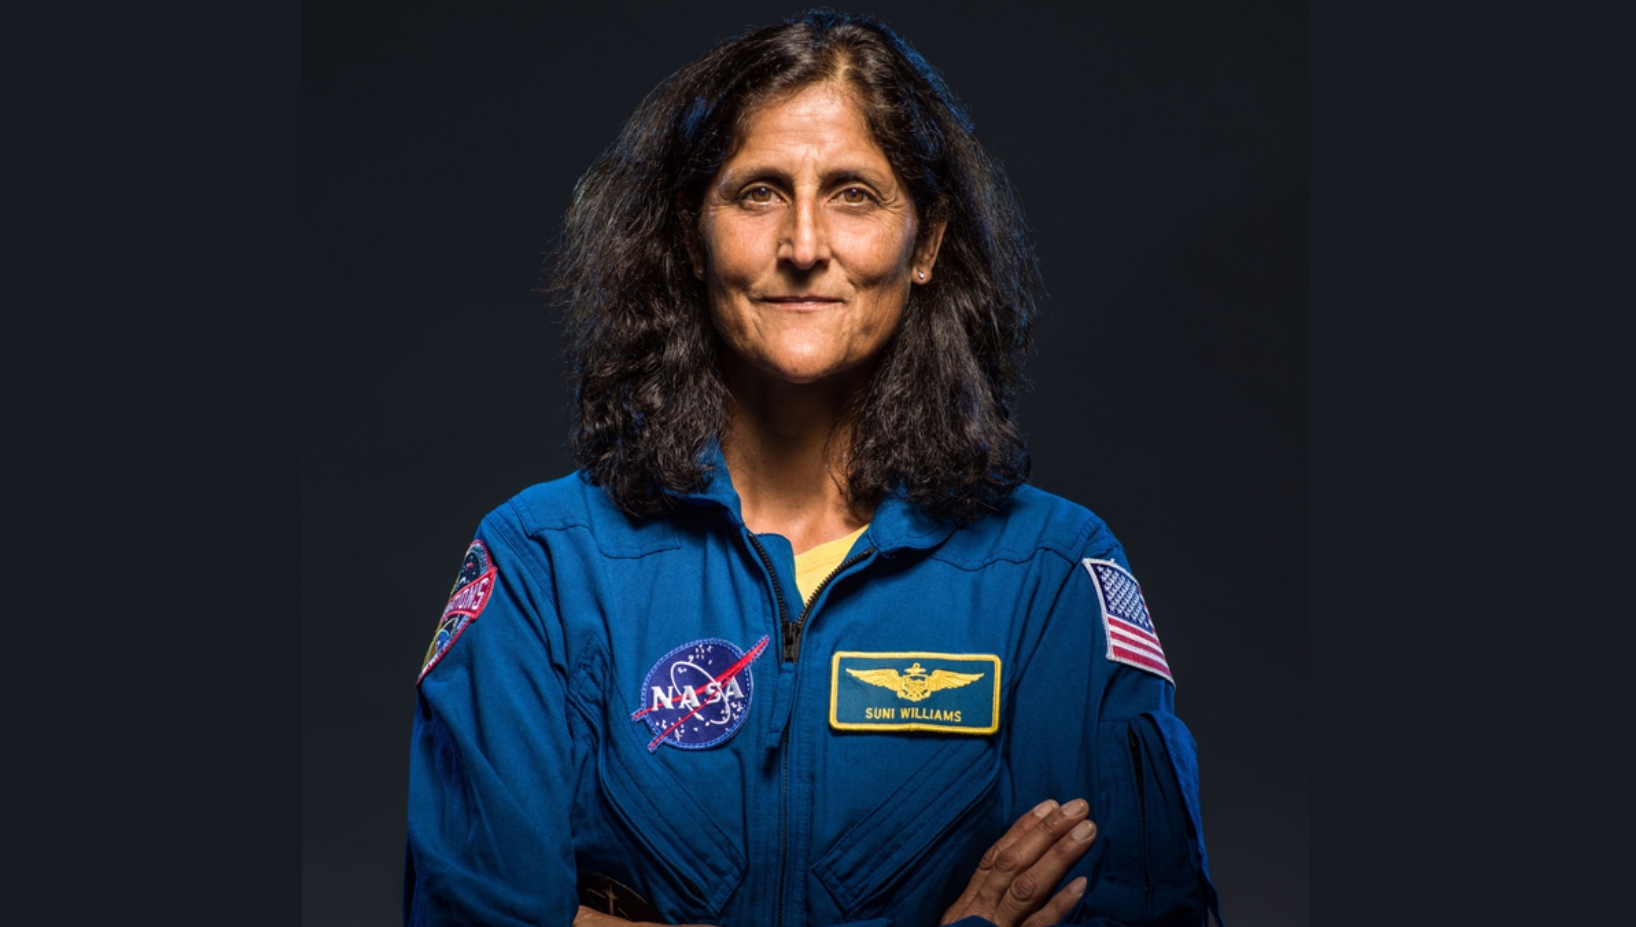 Sunita Williams Embarks on Her Third Journey into Space